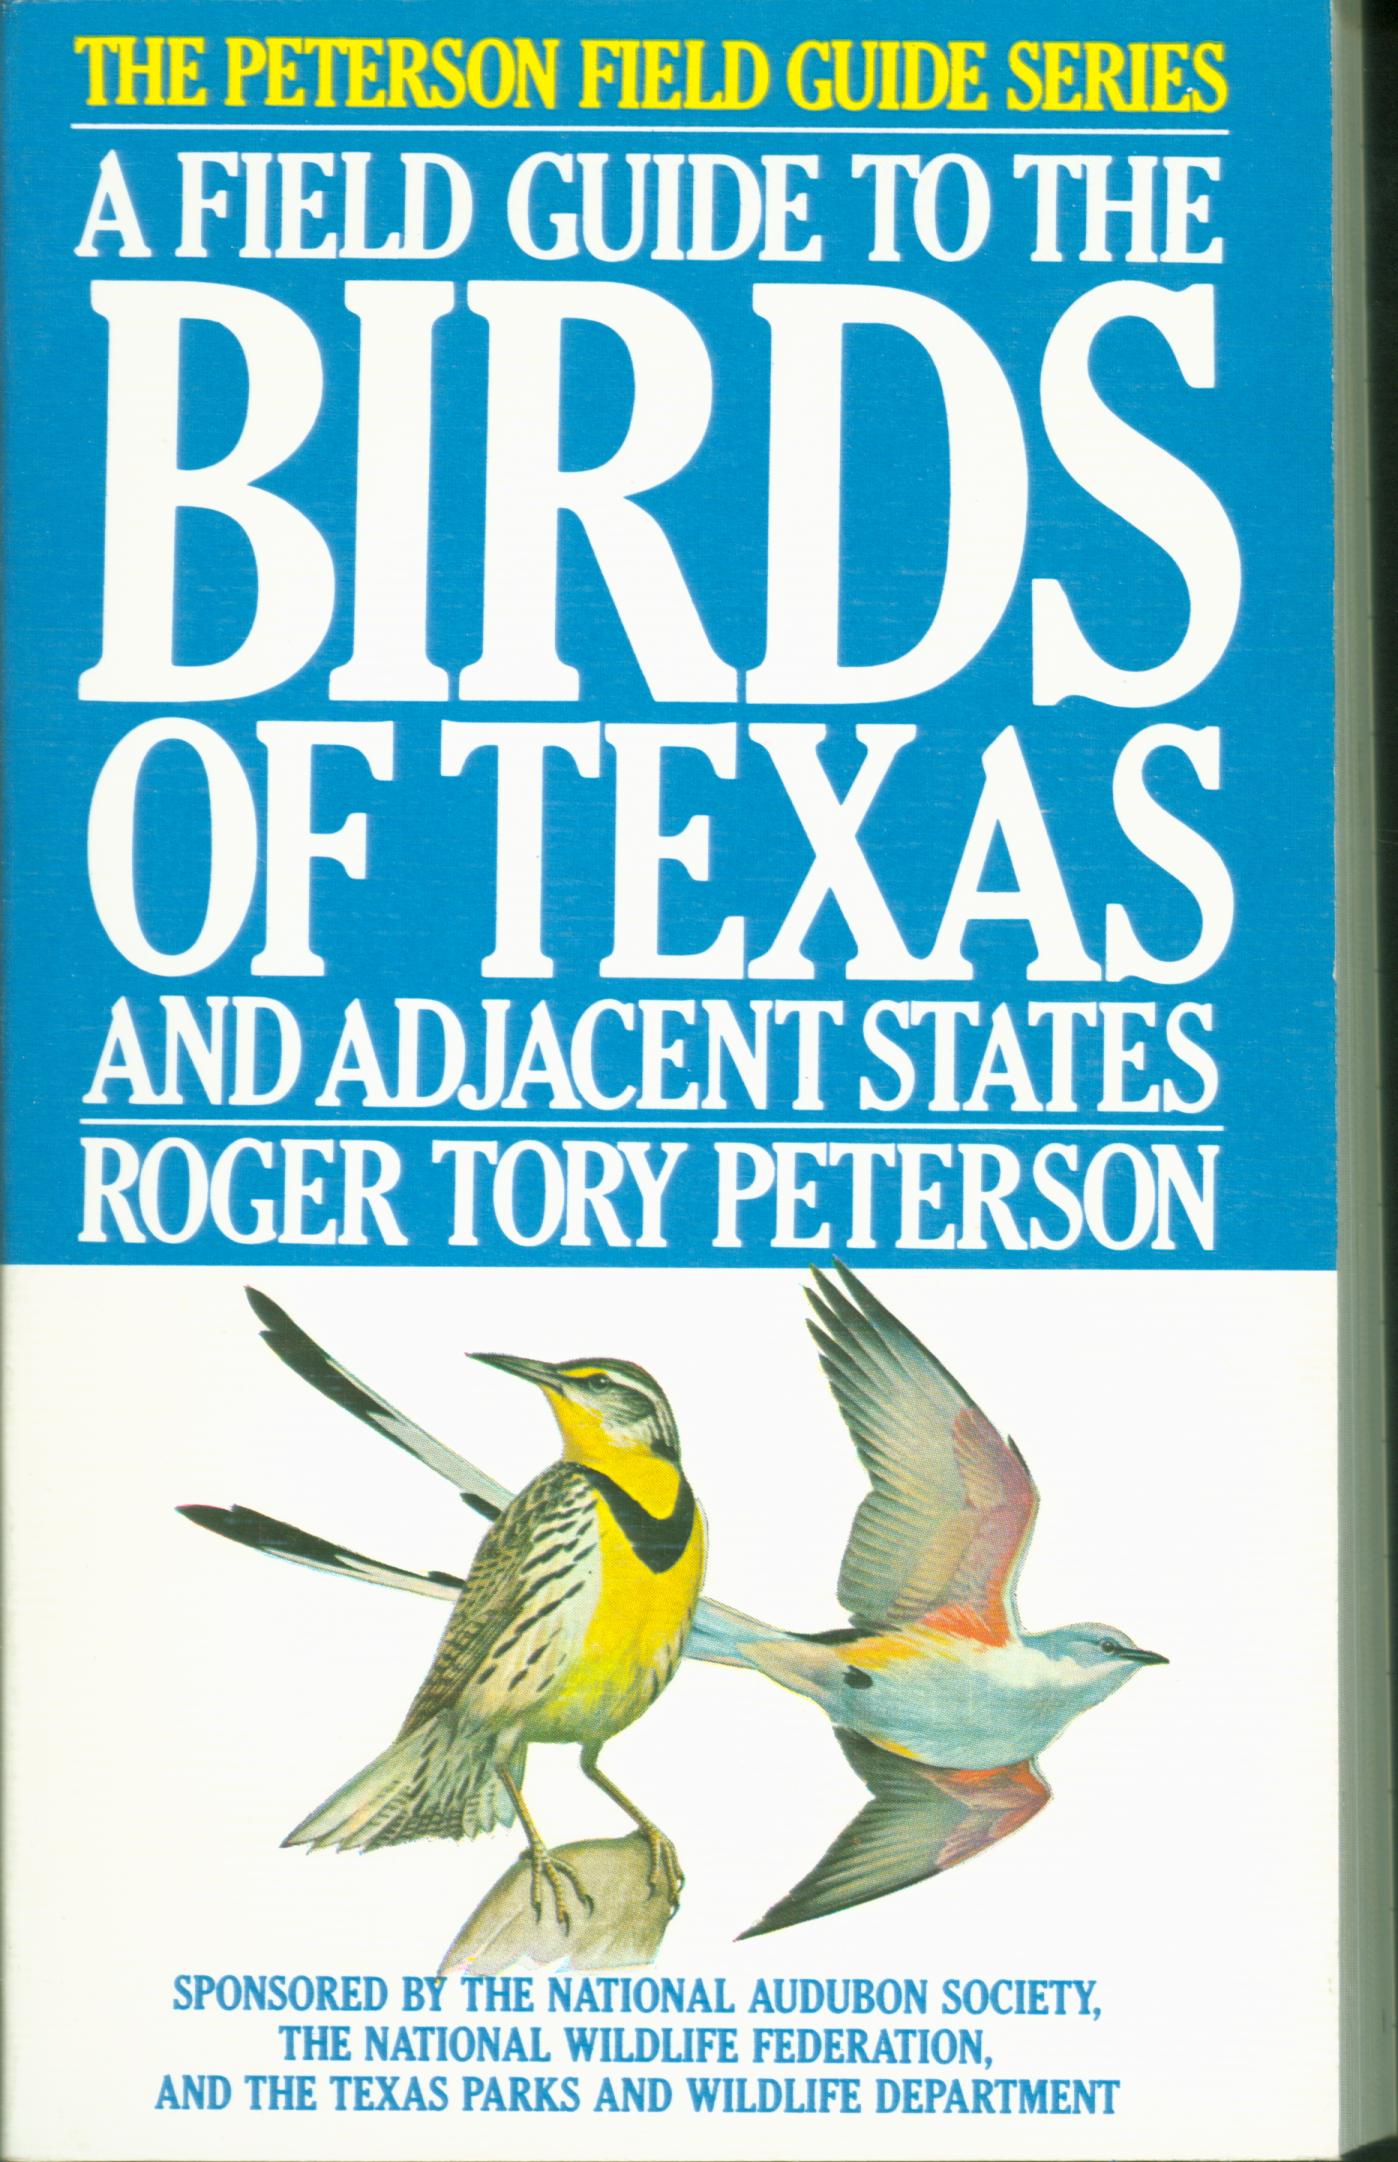 A FIELD GUIDE TO THE BIRDS OF TEXAS AND ADJACENT STATES.